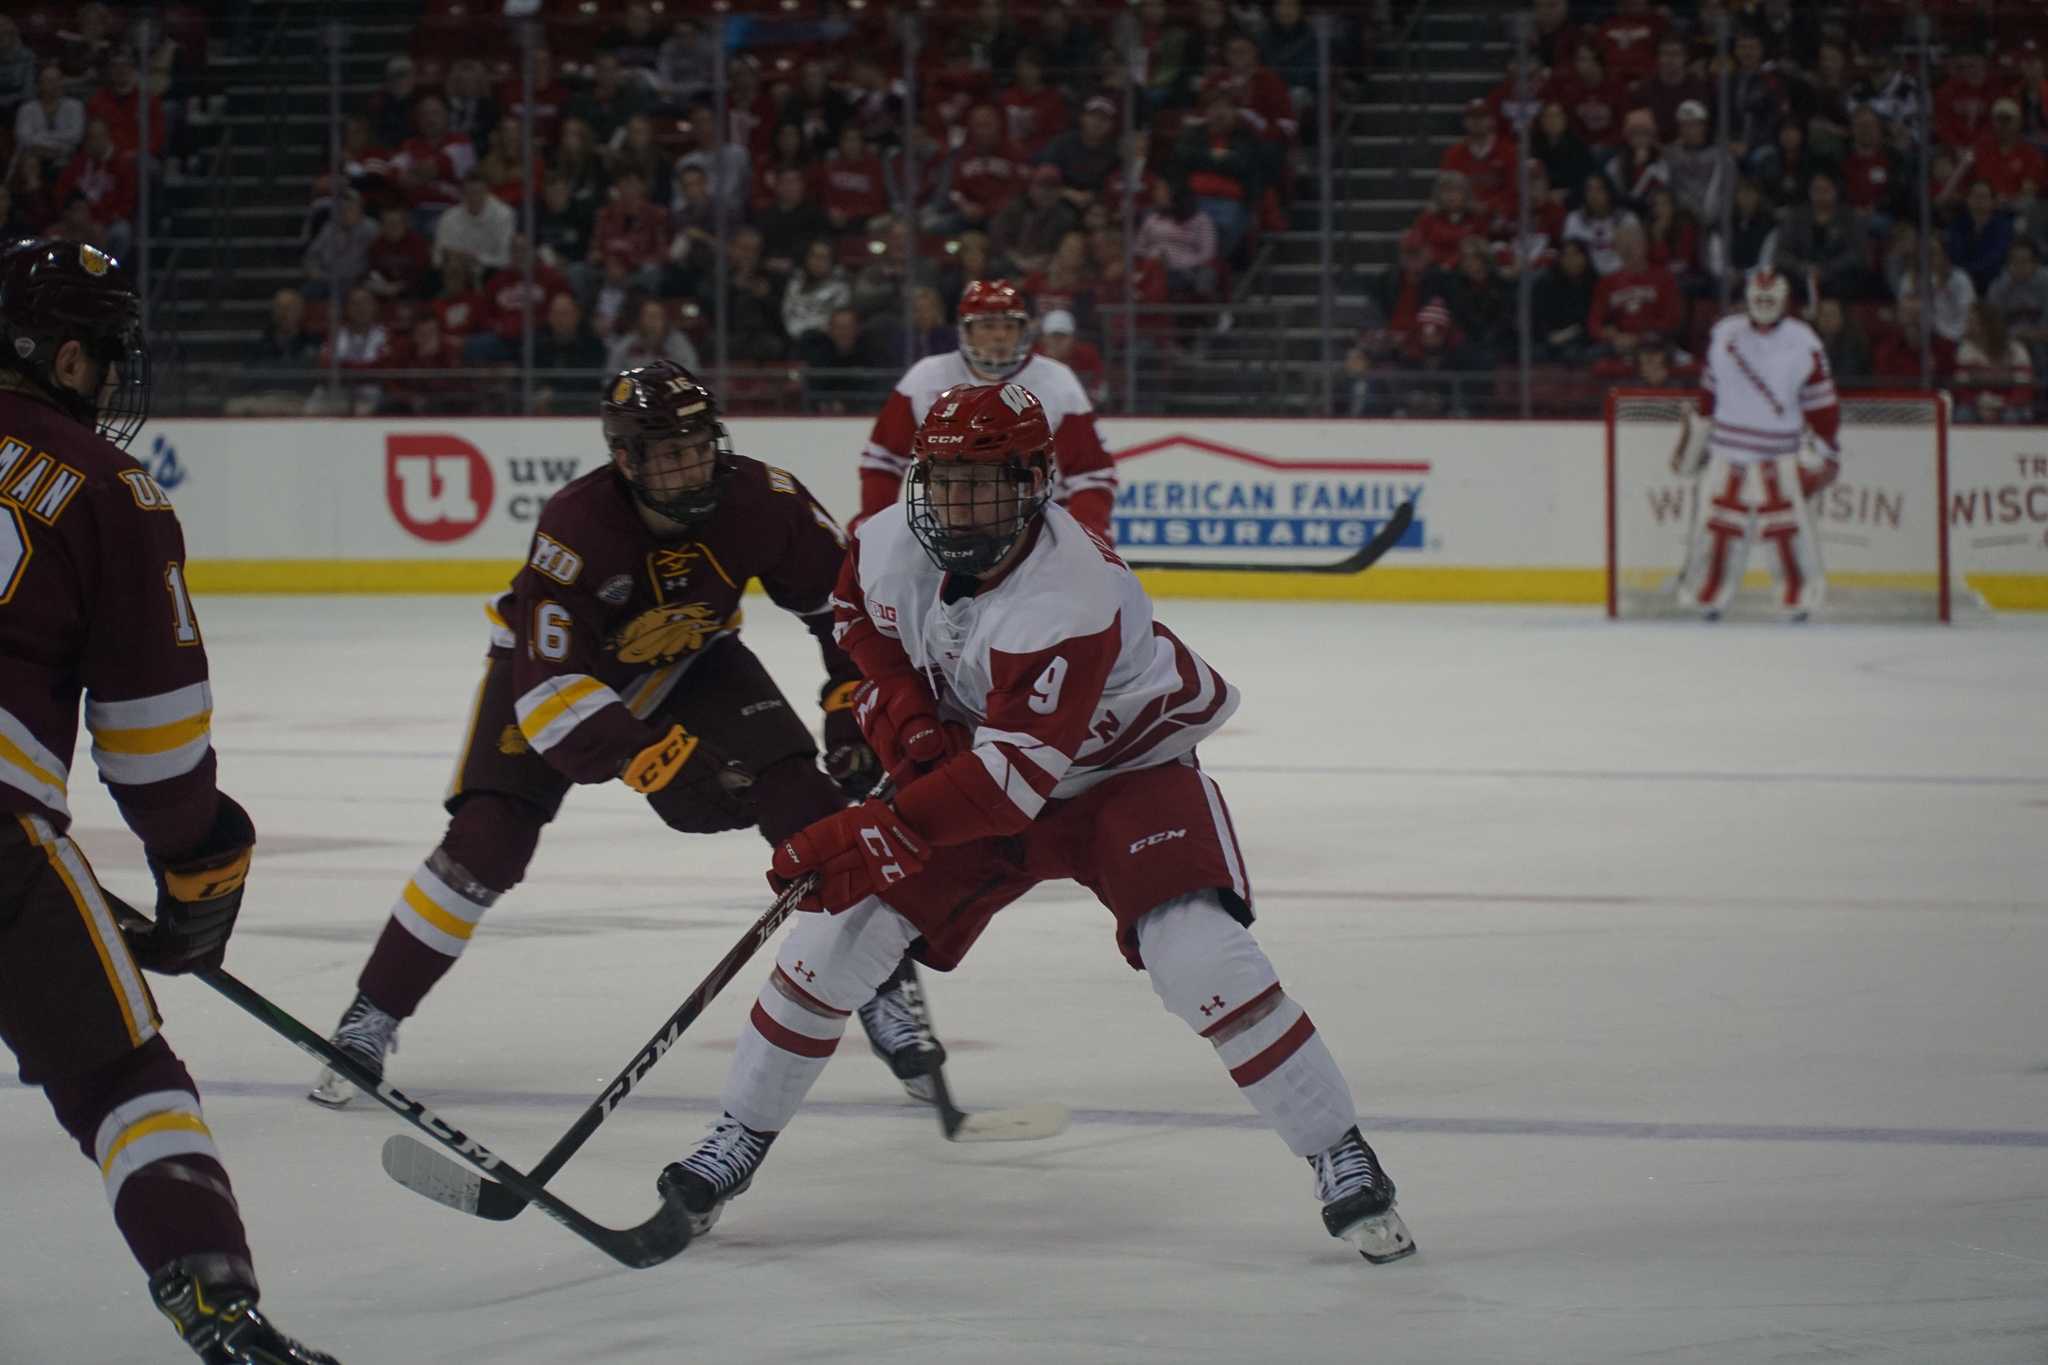 From Stevens Point to the NHL? Caufield a first-round draft prospect